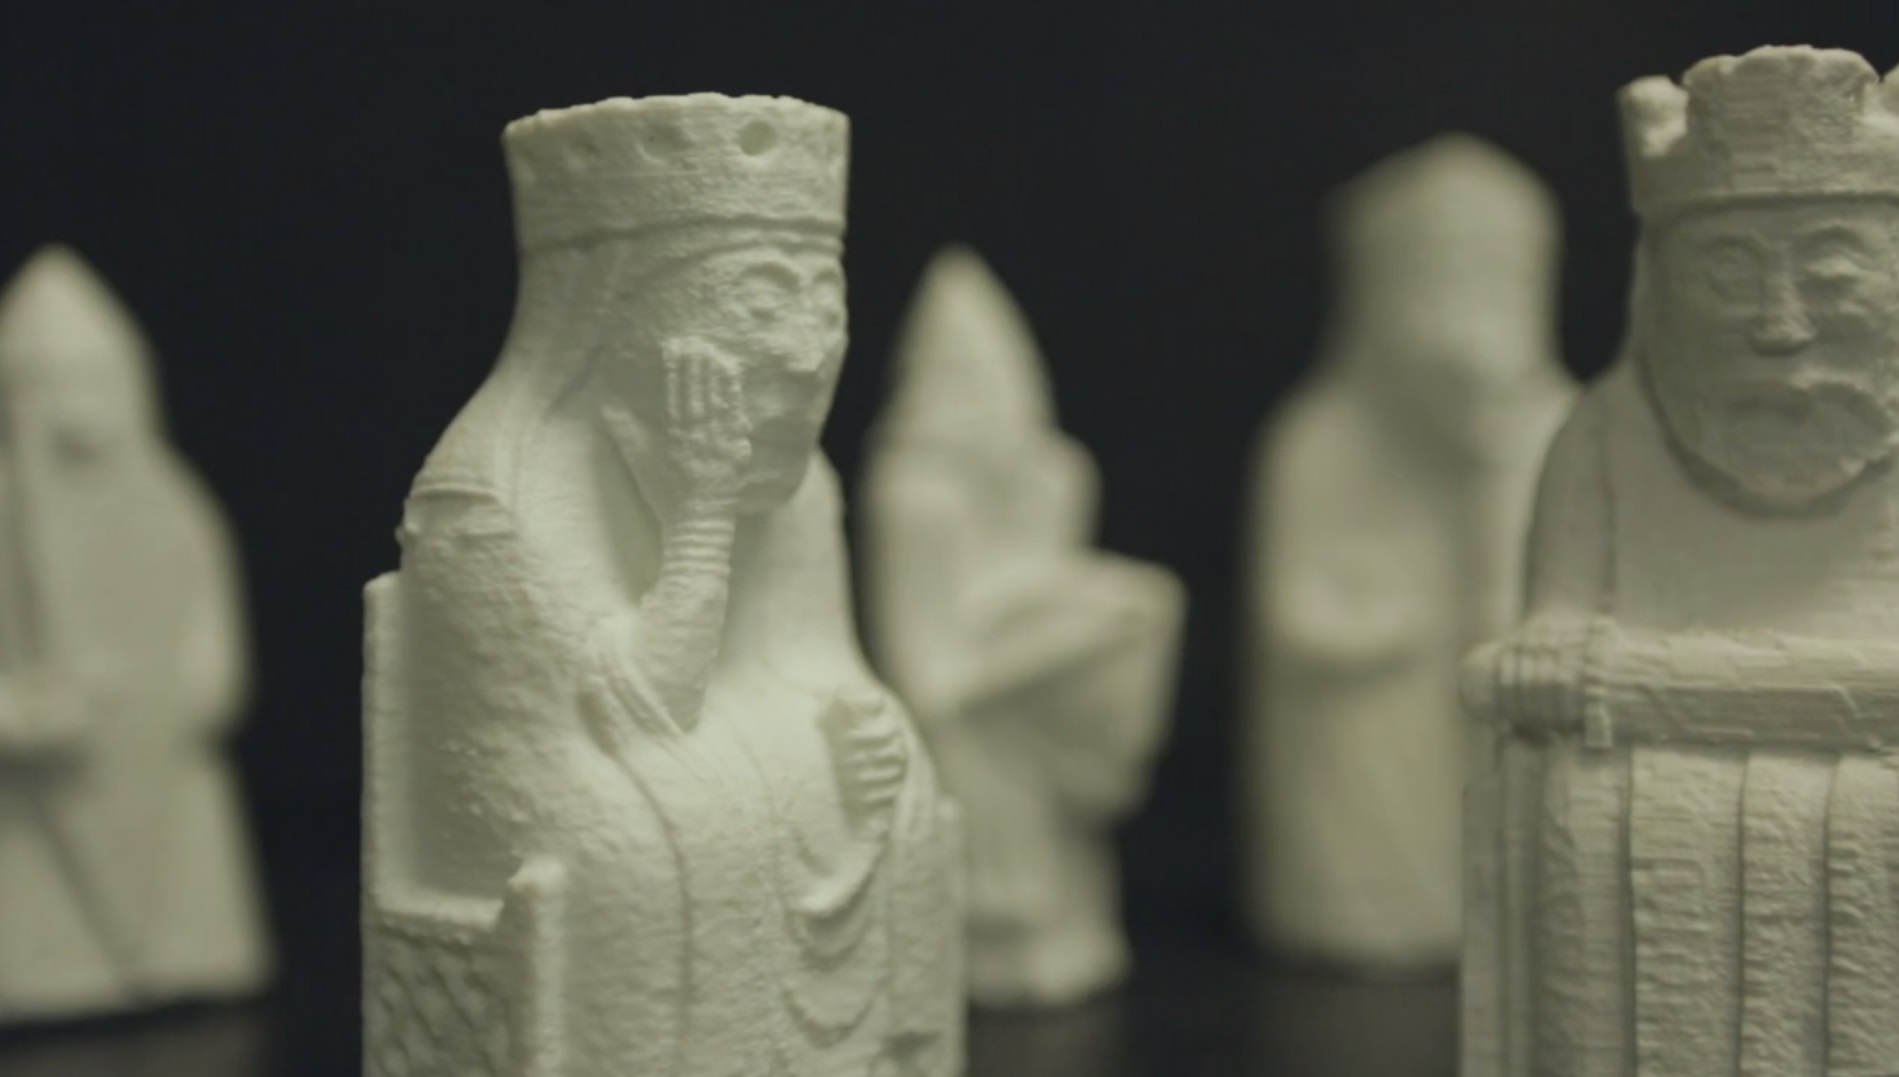 Cloning Dolly? Introducing 3D printing at National Museums Scotland